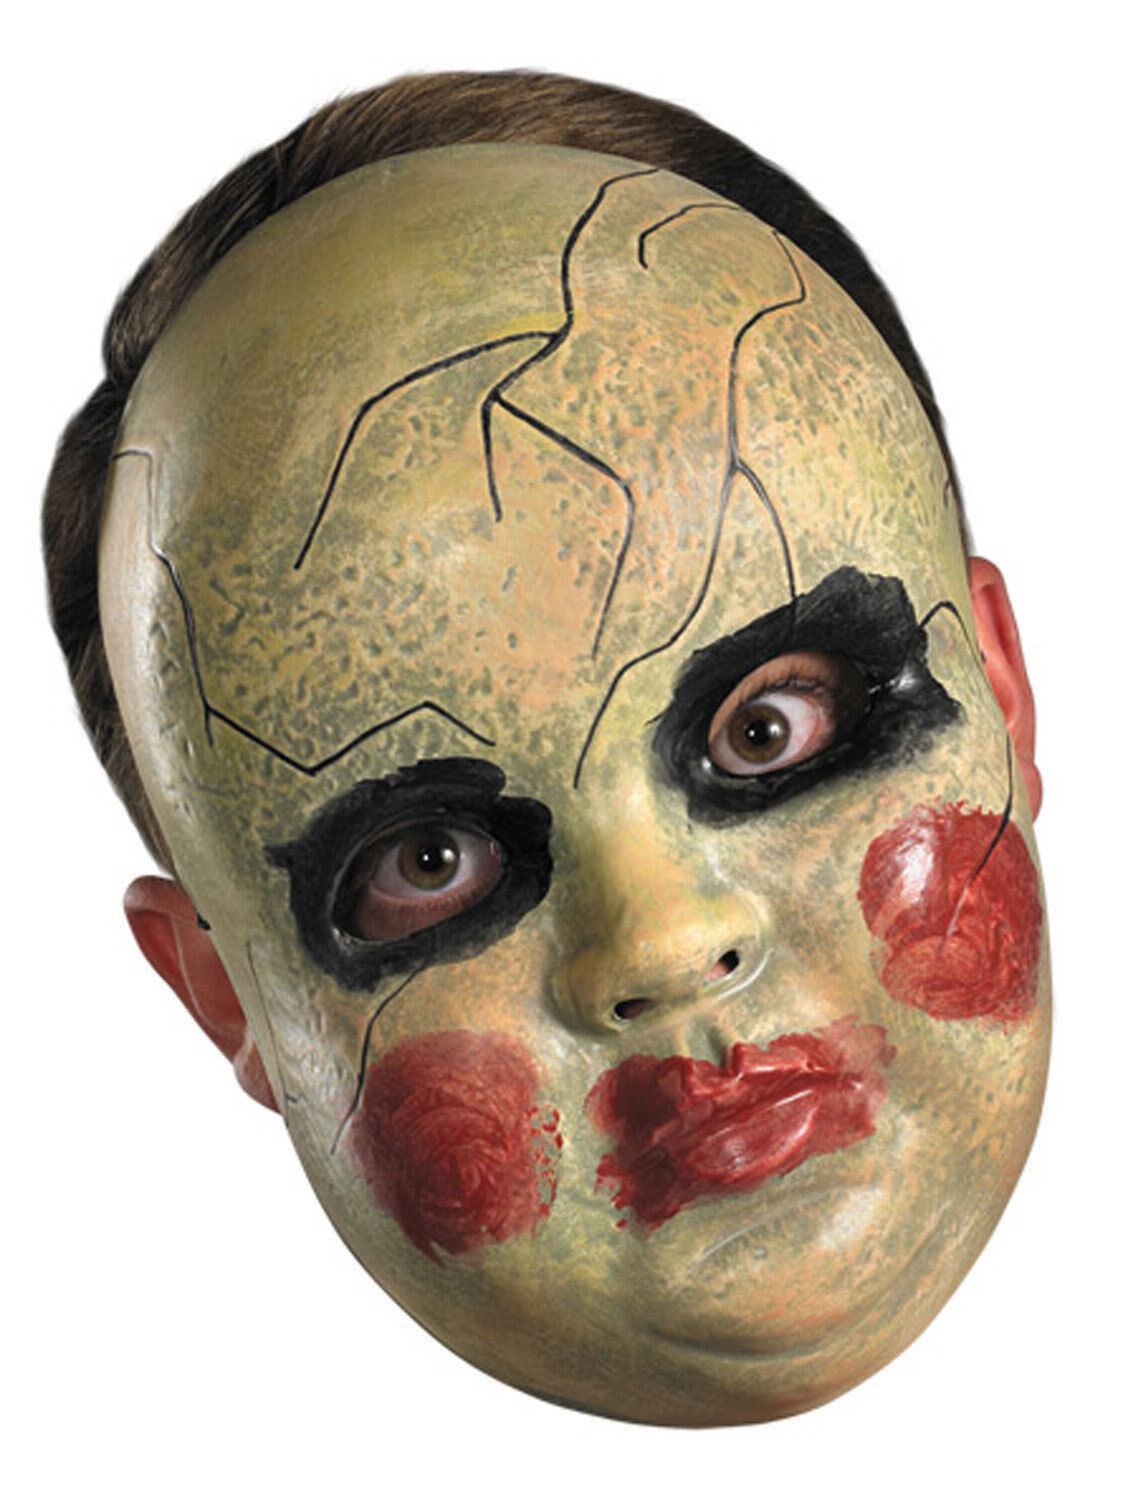 Creepy Horror Prop BABY DOLL FACE MASK Spooky Halloween Costume Ghost Decoration